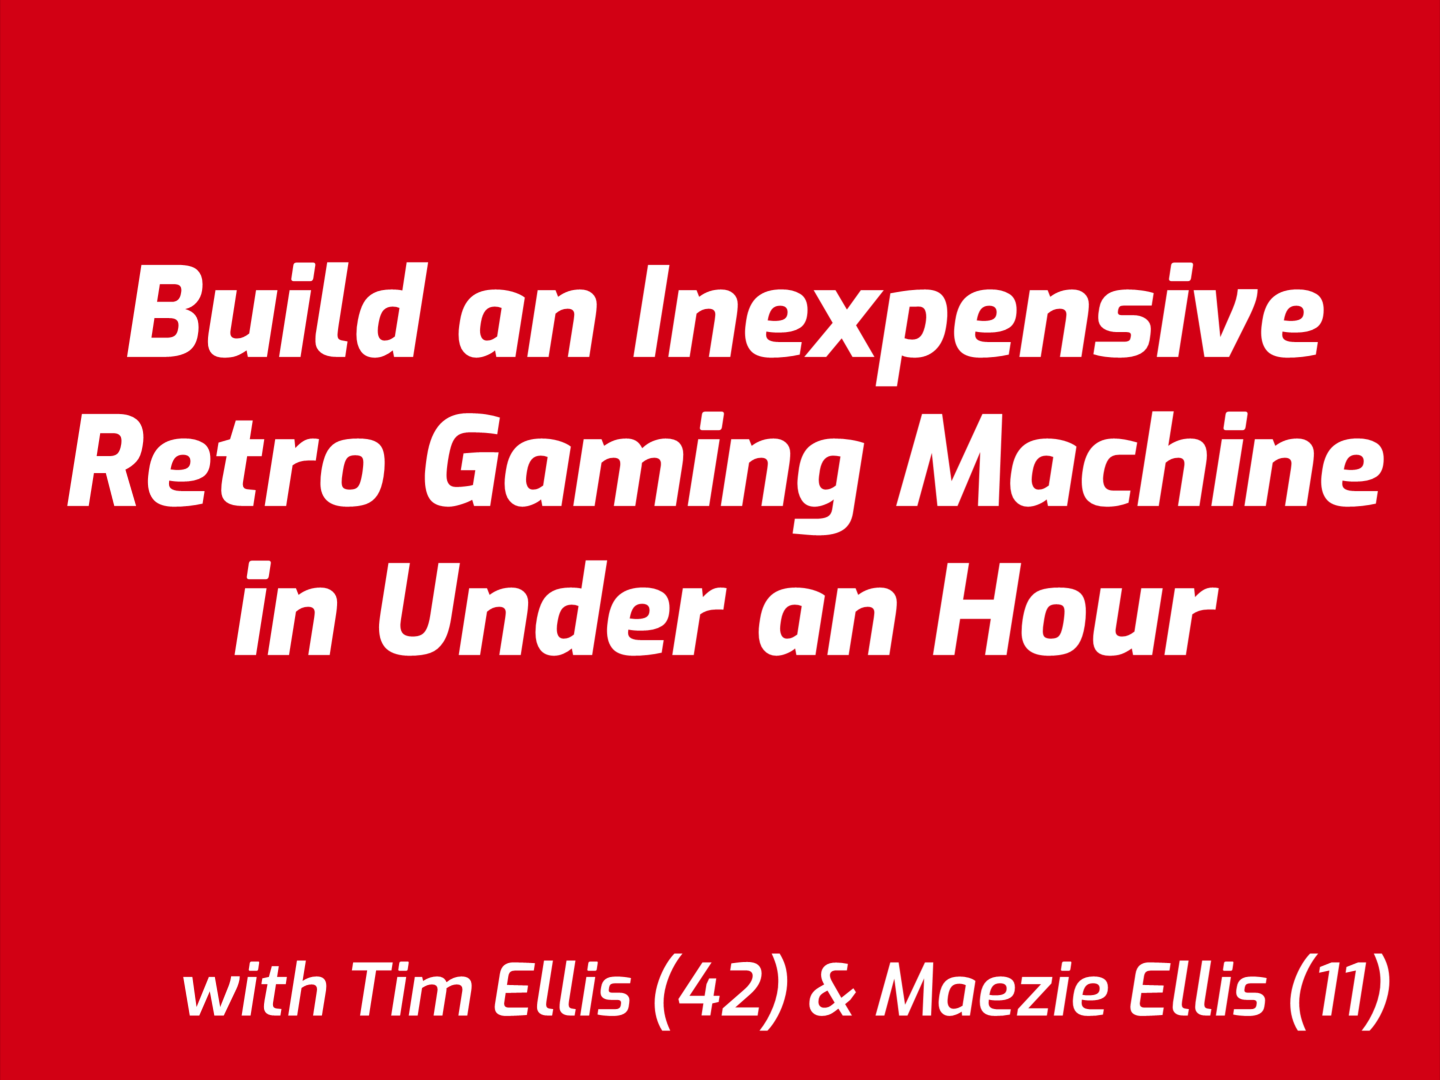 PAX West 2022: Build an Inexpensive Retro Gaming Machine in Under an Hour